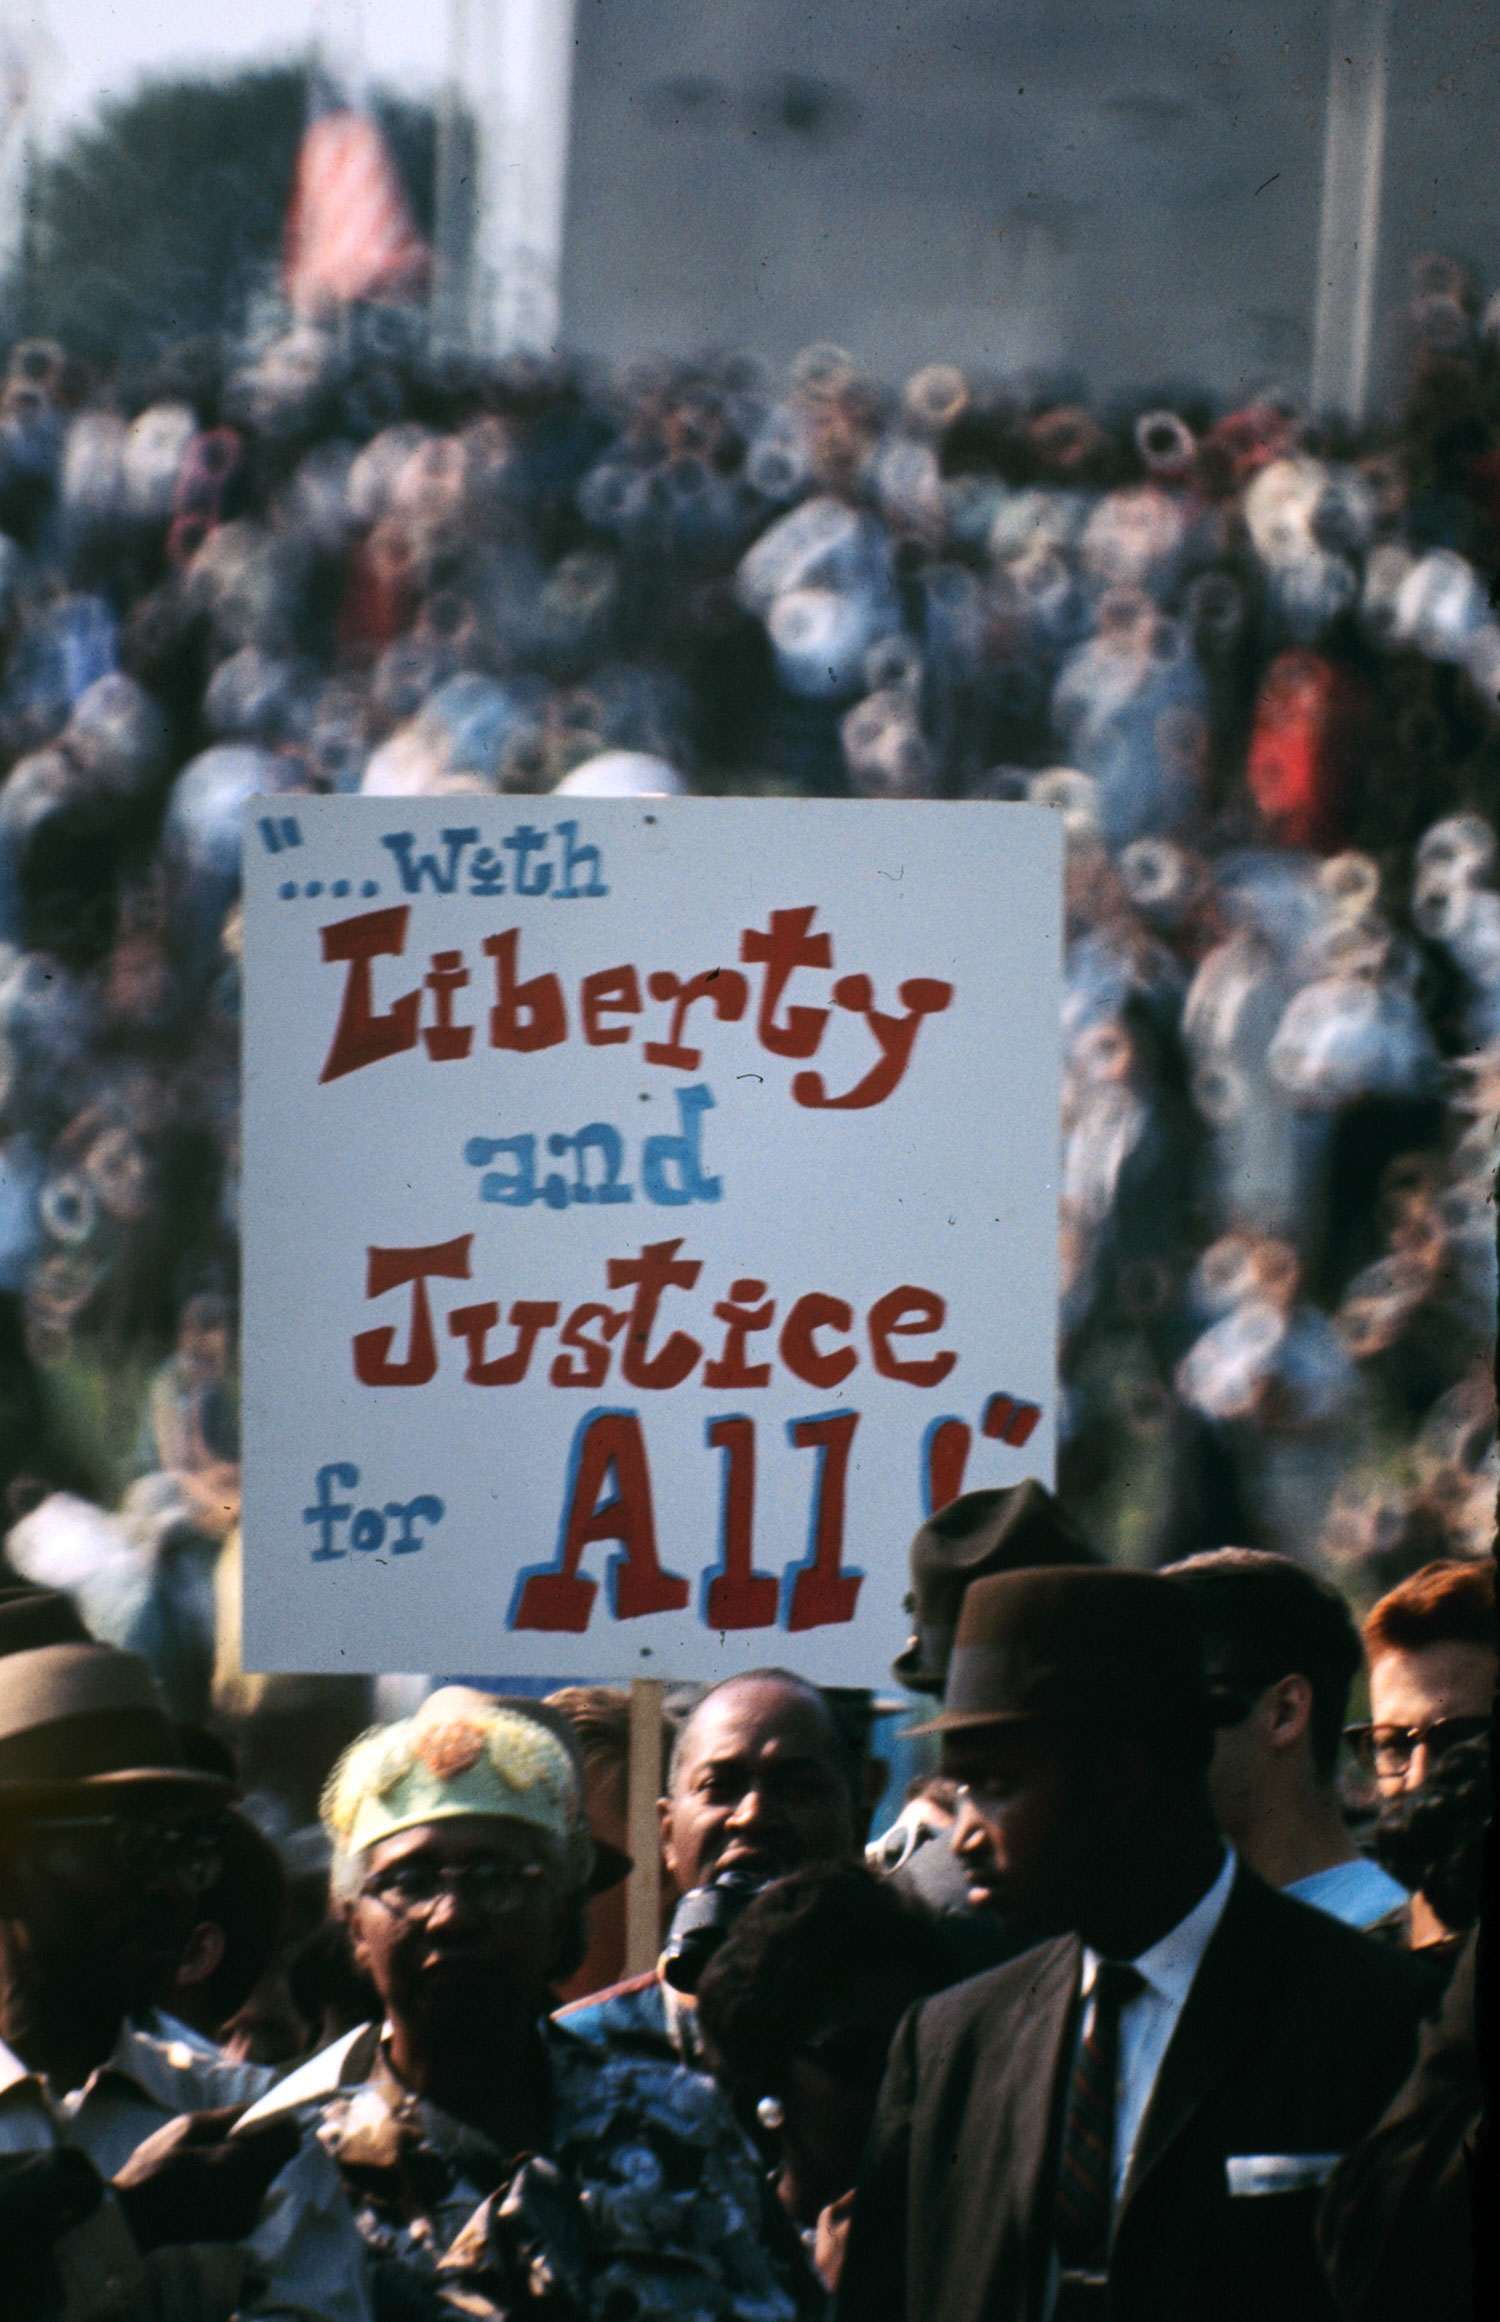 Scene from the March on Washington for Jobs and Freedom, August 28, 1963.